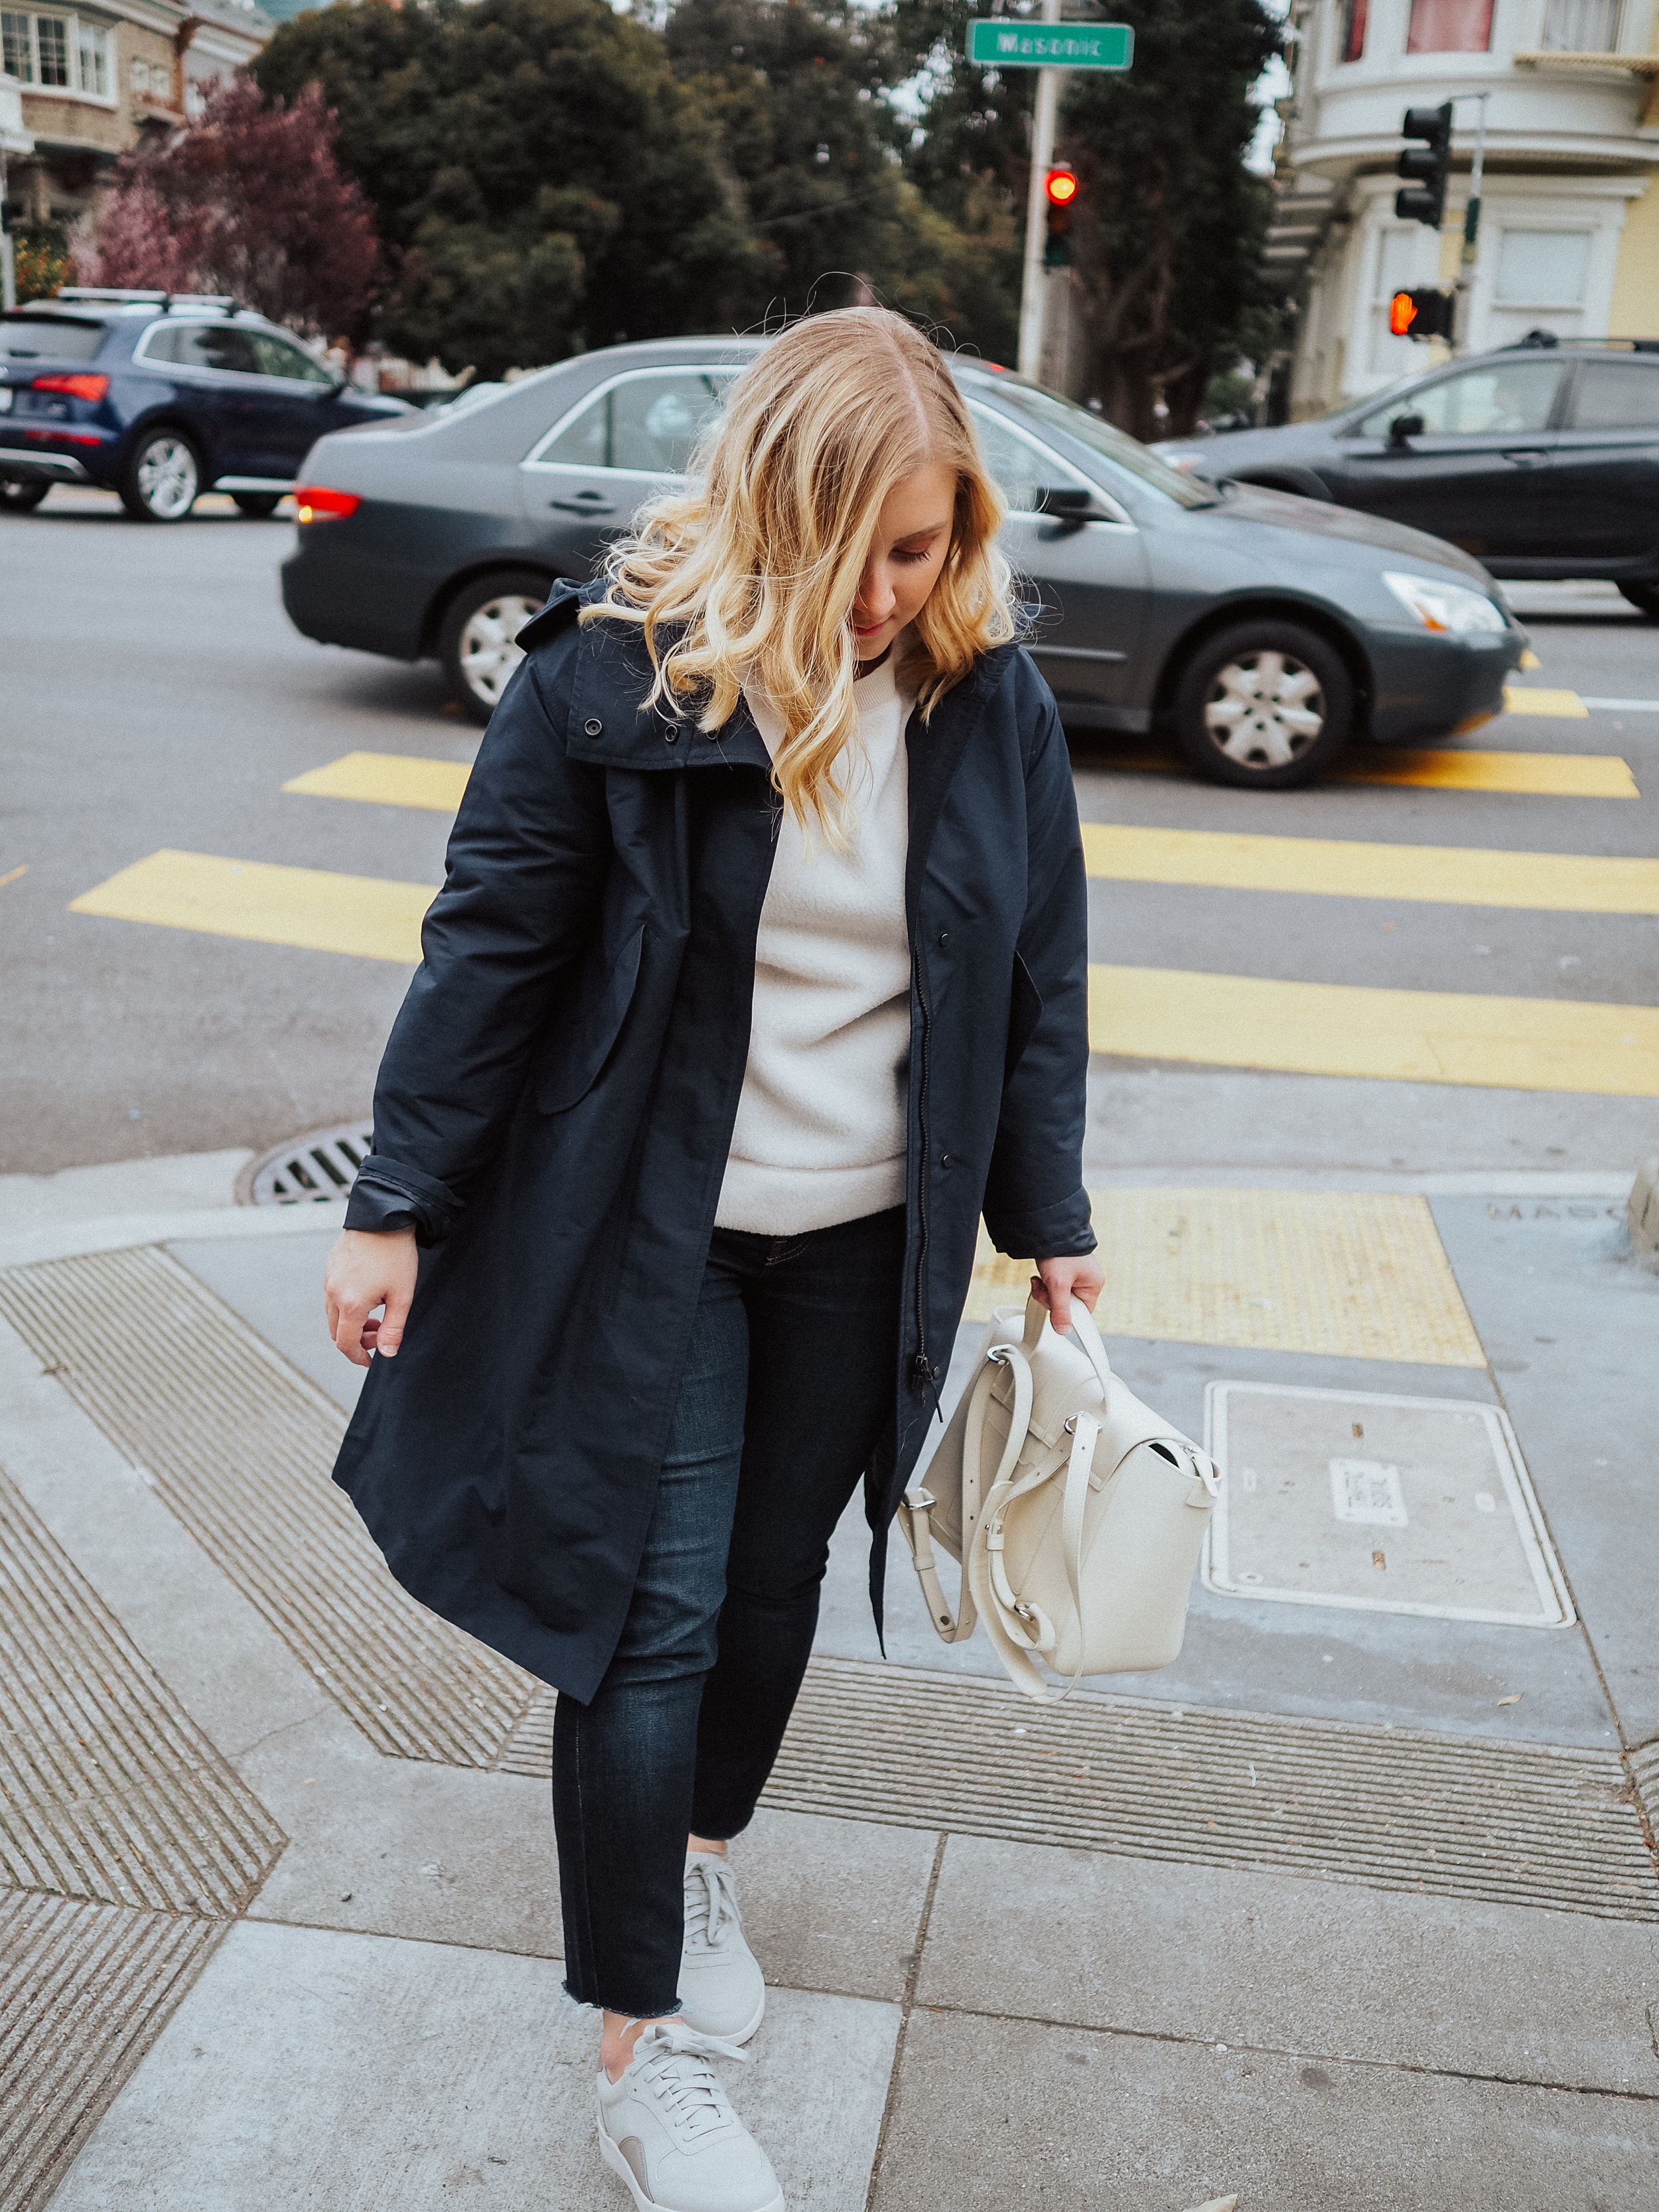 Everlane ReNew: The Chic & Sustainable Collection You'll Feel Good